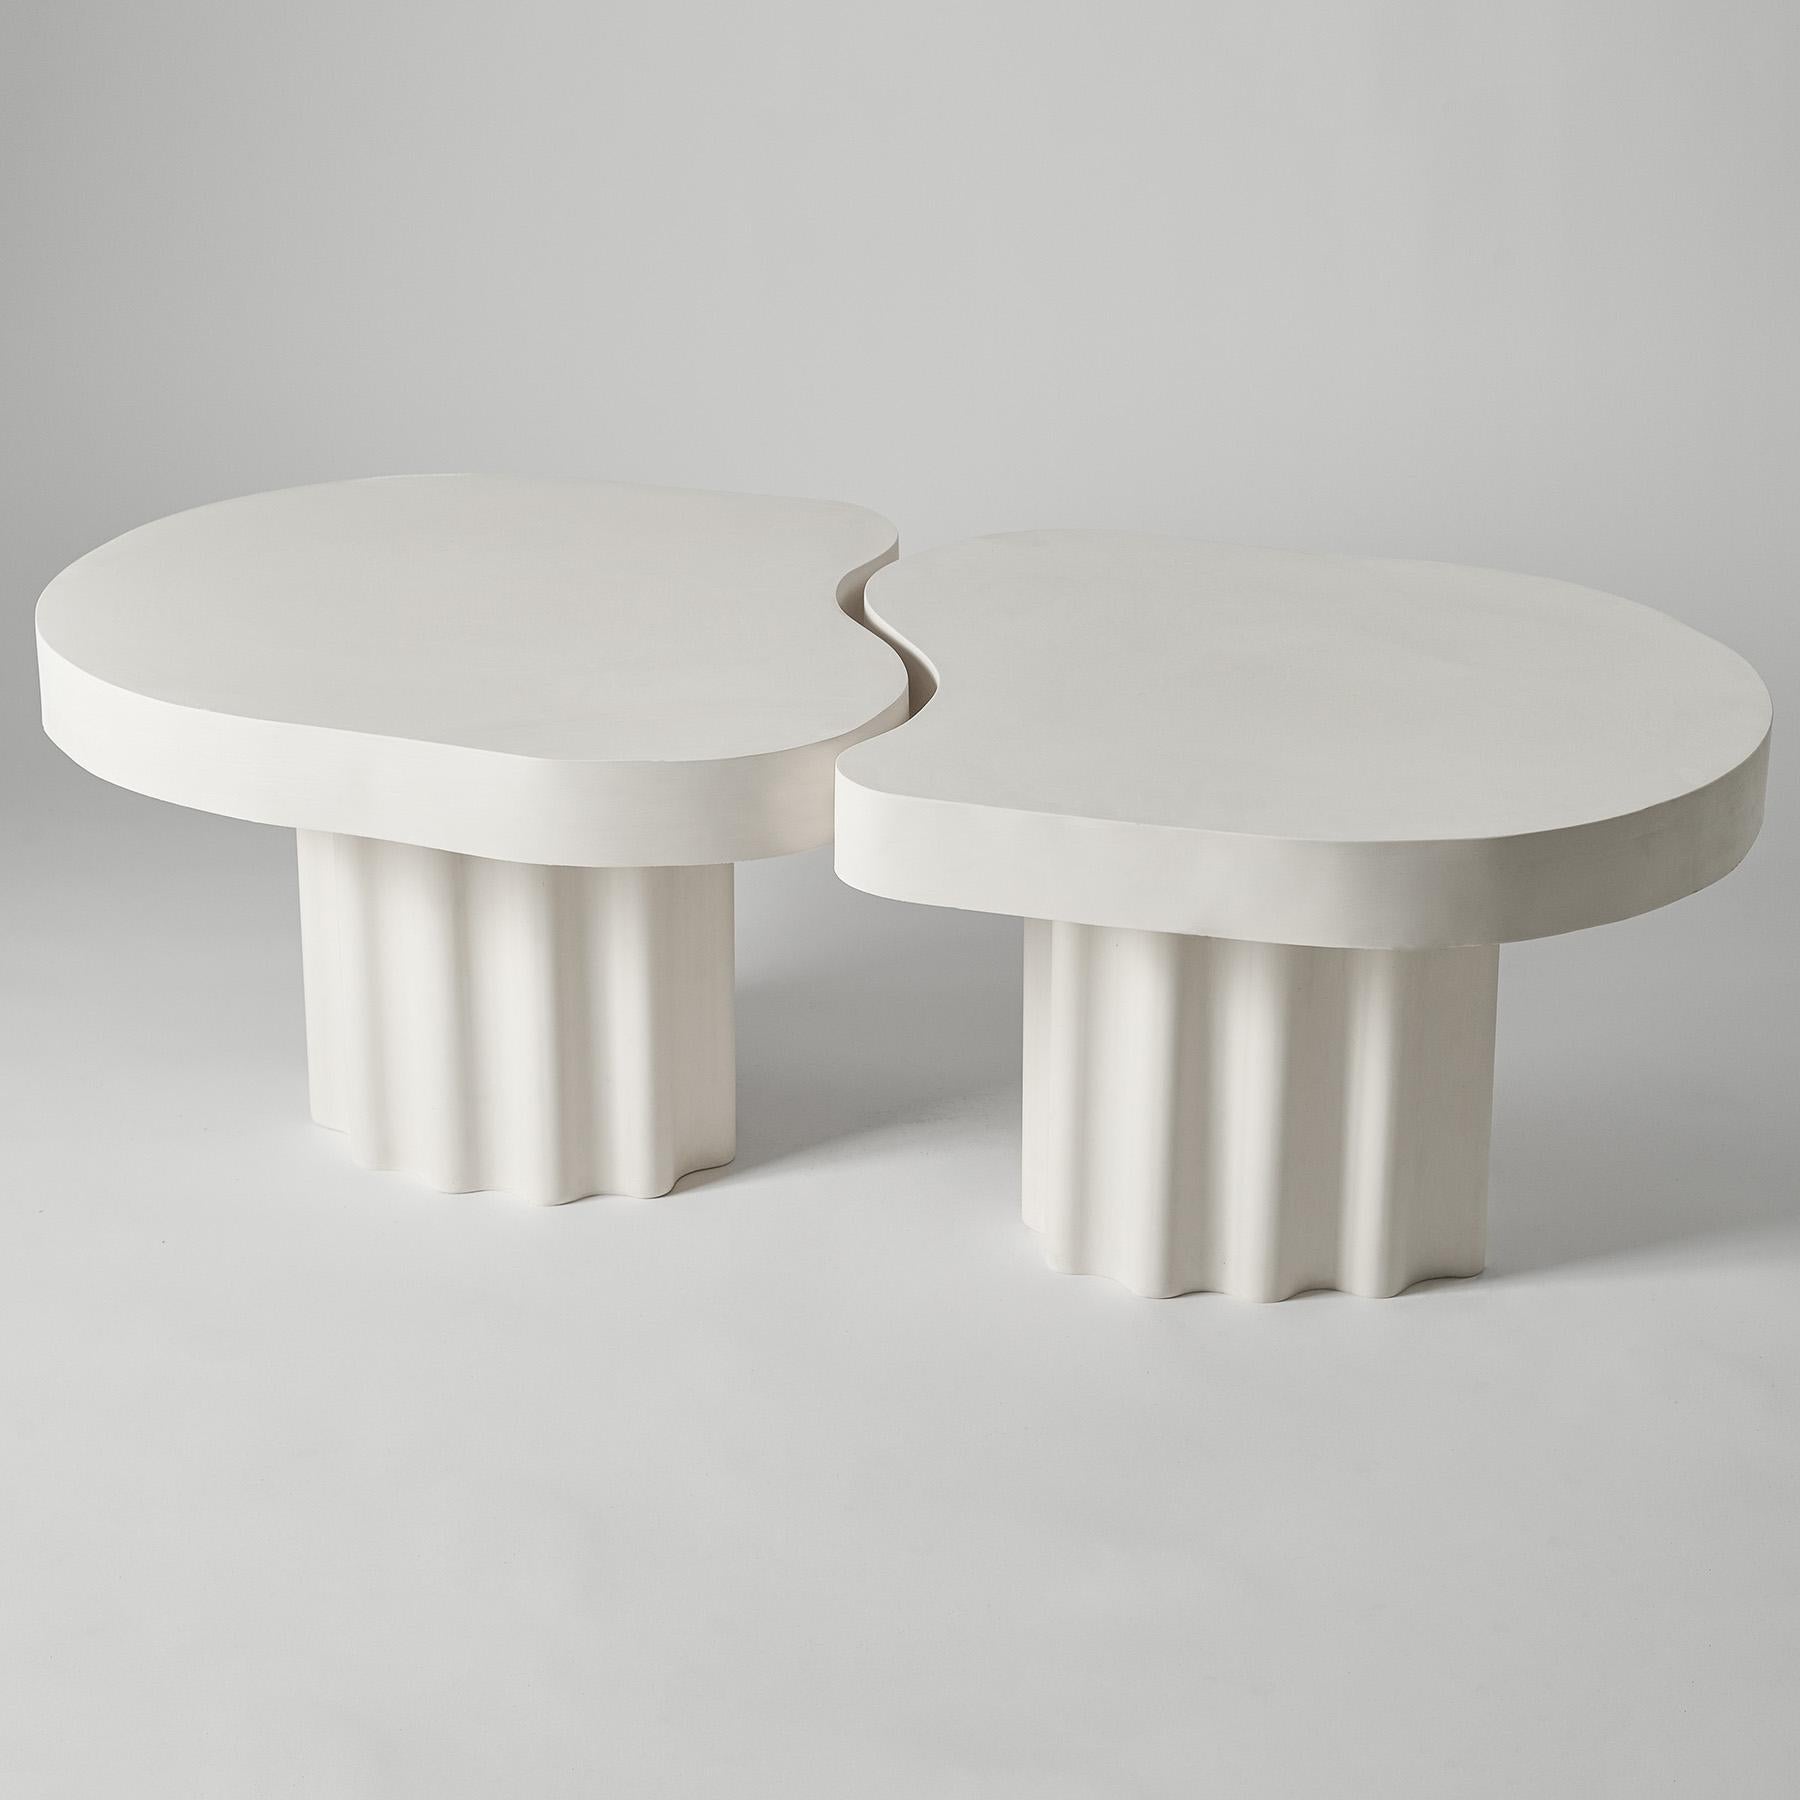 Set of 2 Organic Edge No. 1 Coffee Tables by Perler
Dimensions: One table: D 56 x W 65 x H 40 cm.
Both tables: D 58 x W 120 x H 40 cm.
Materials: Jesmonite.
Weight of a single table: 15-20 kg.

The height of these tables is customizable. Please